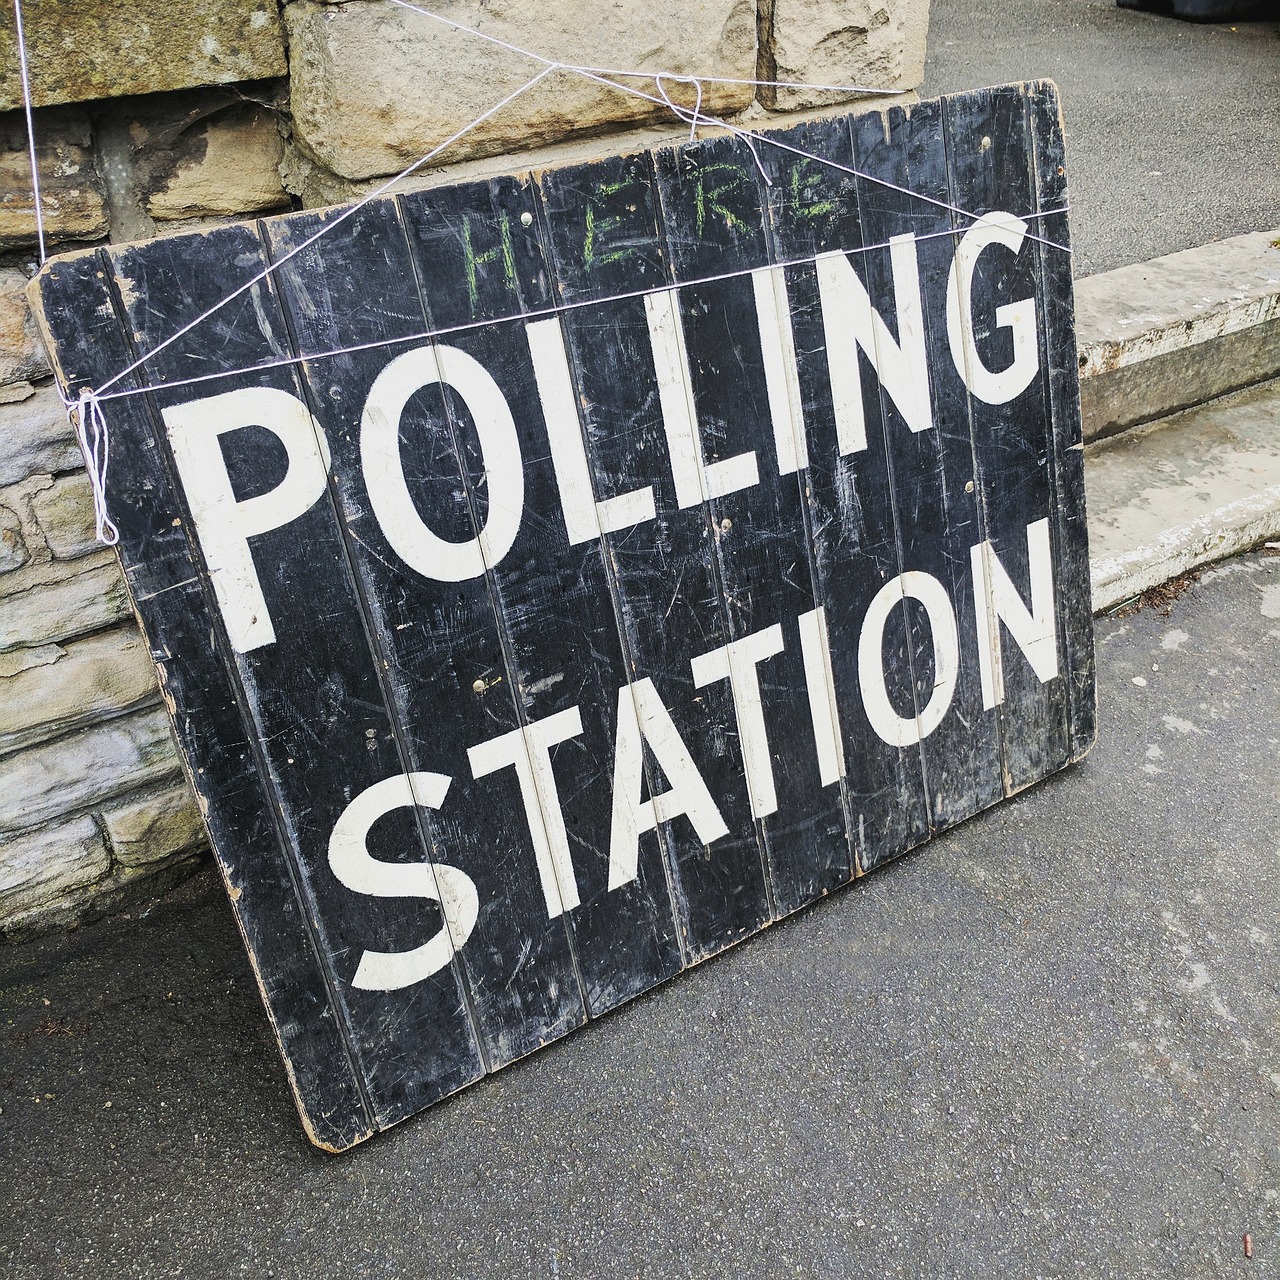 14,000 England voters denied participation under new ID rules